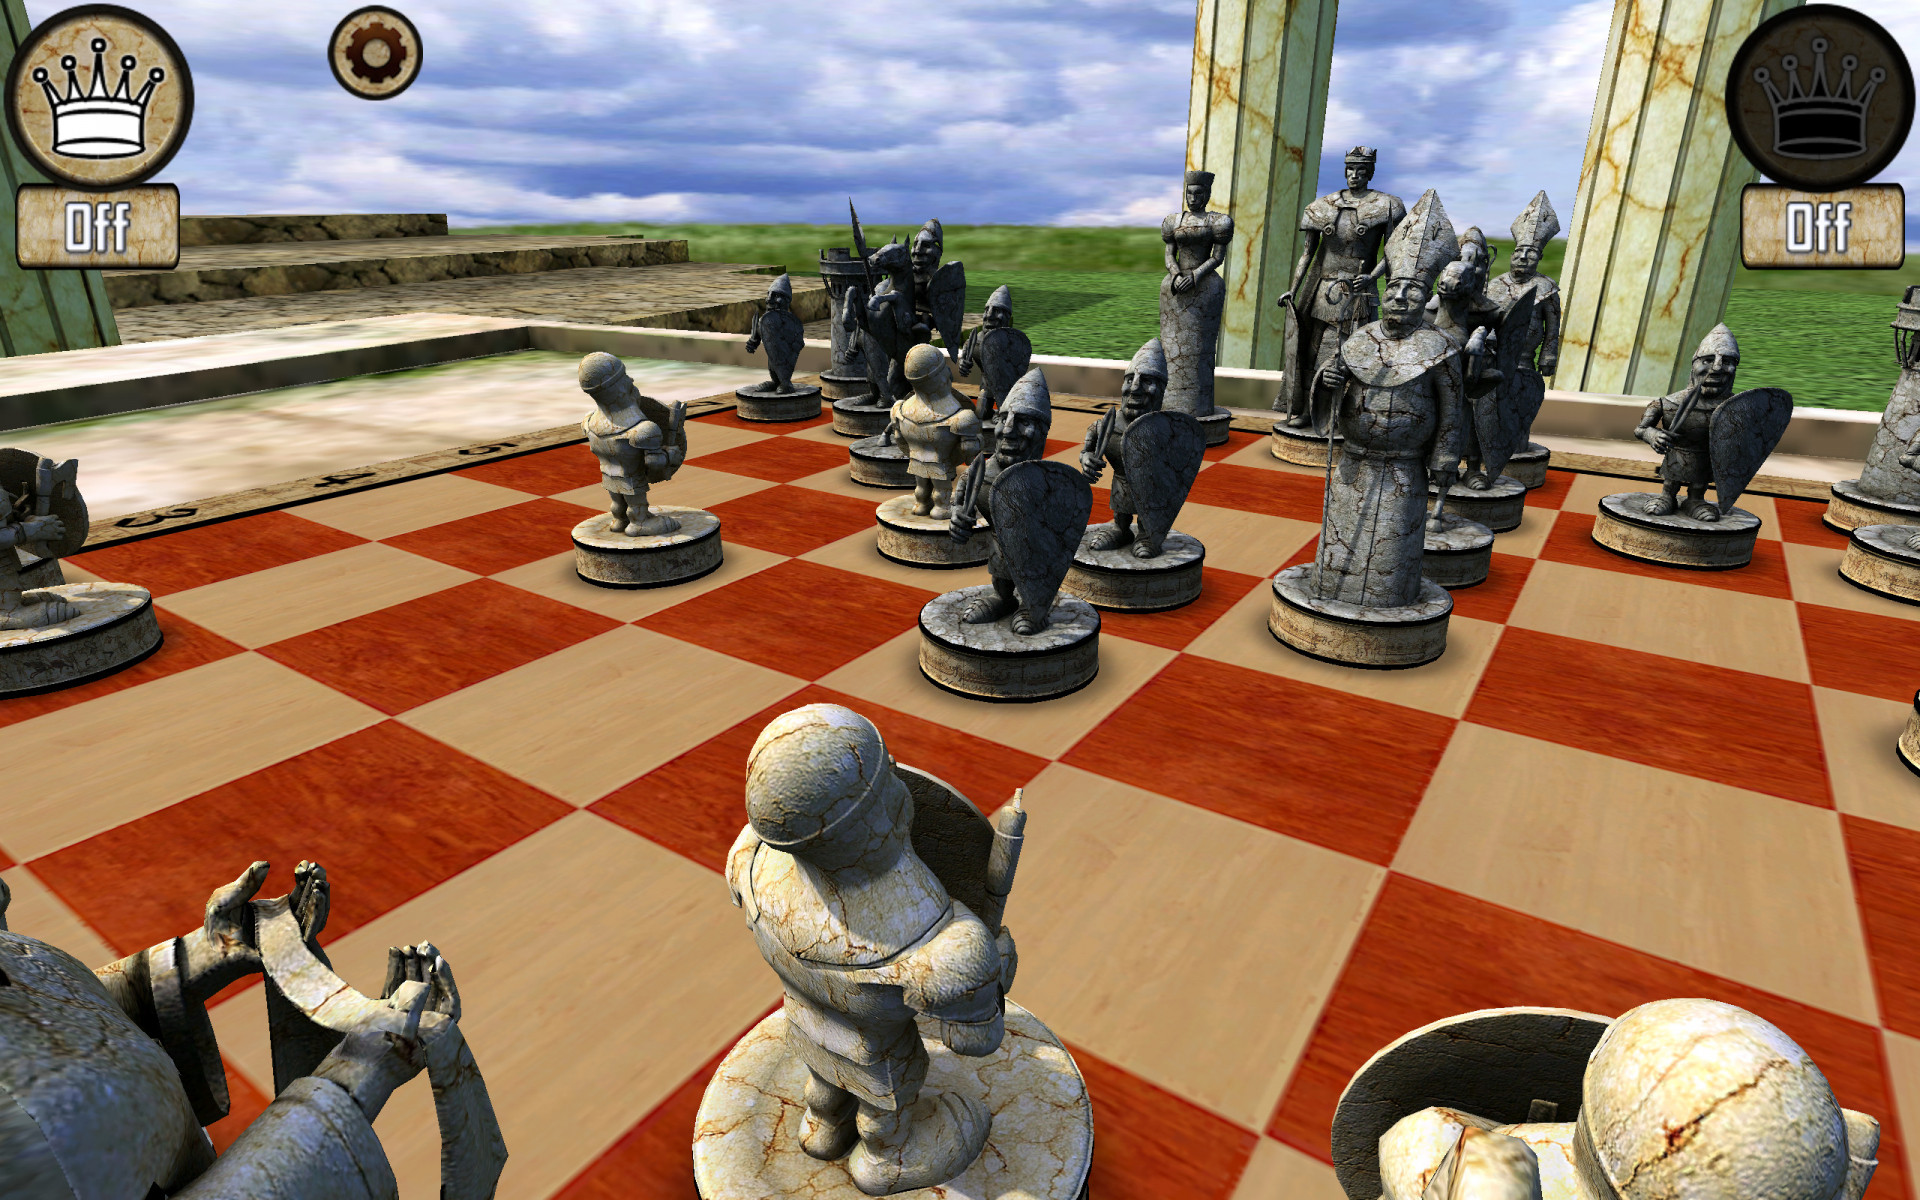 Chess is a game. Шахматы игра шахматы игра в шахматы игра. Шахматы компьютерная игра. Шахматы игра на ПК. Игры на шахматной доске.